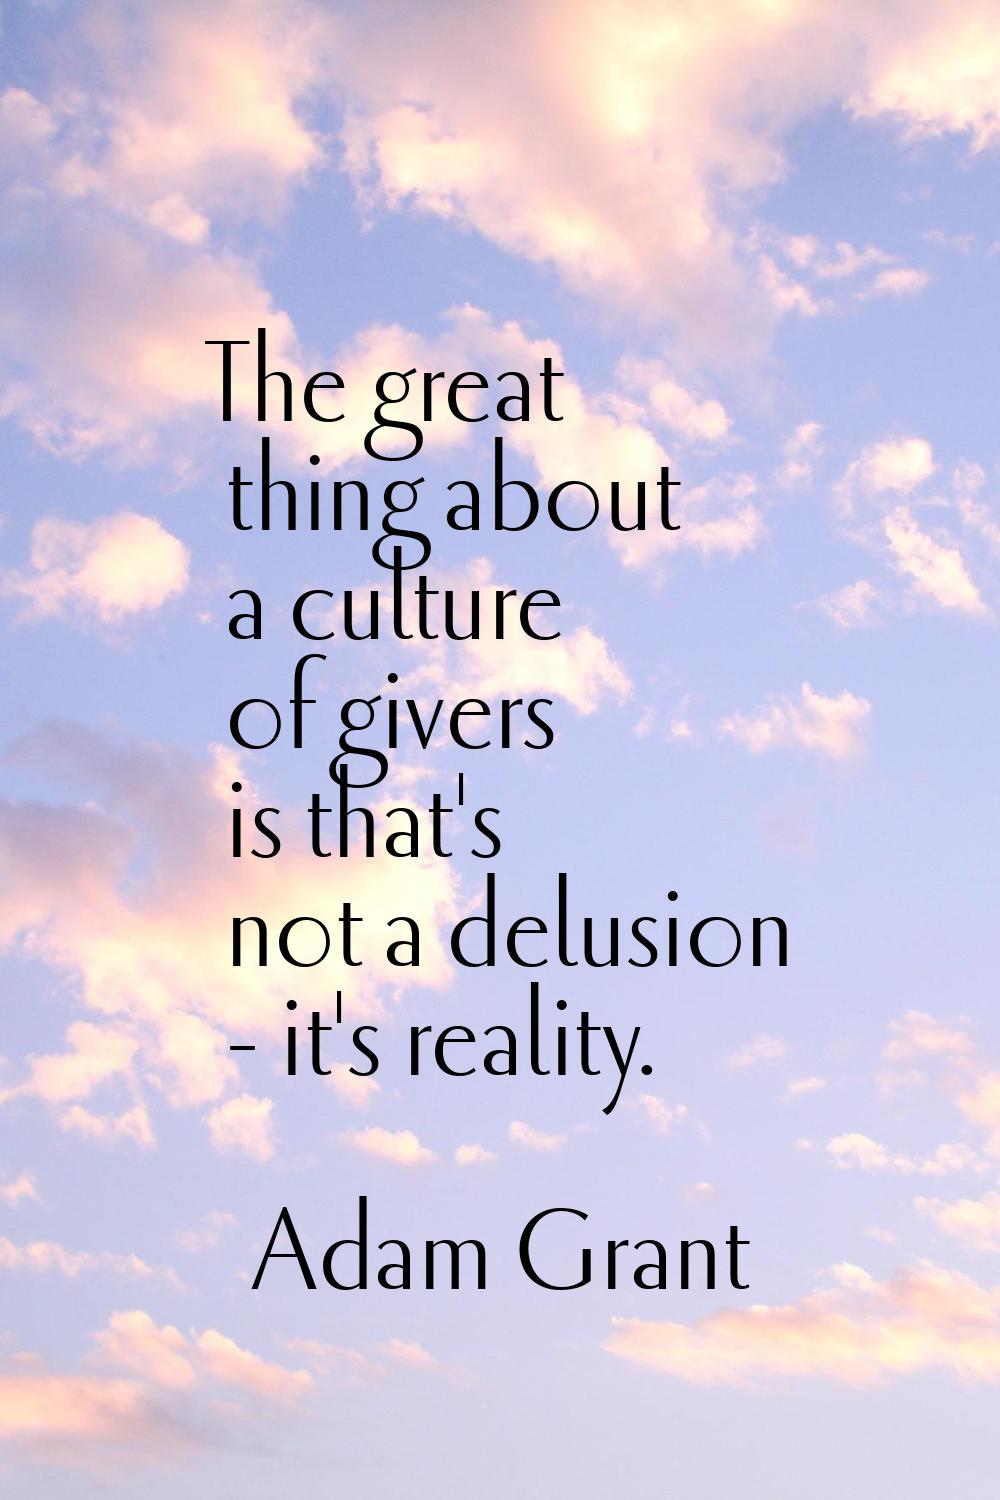 The great thing about a culture of givers is that's not a delusion - it's reality.